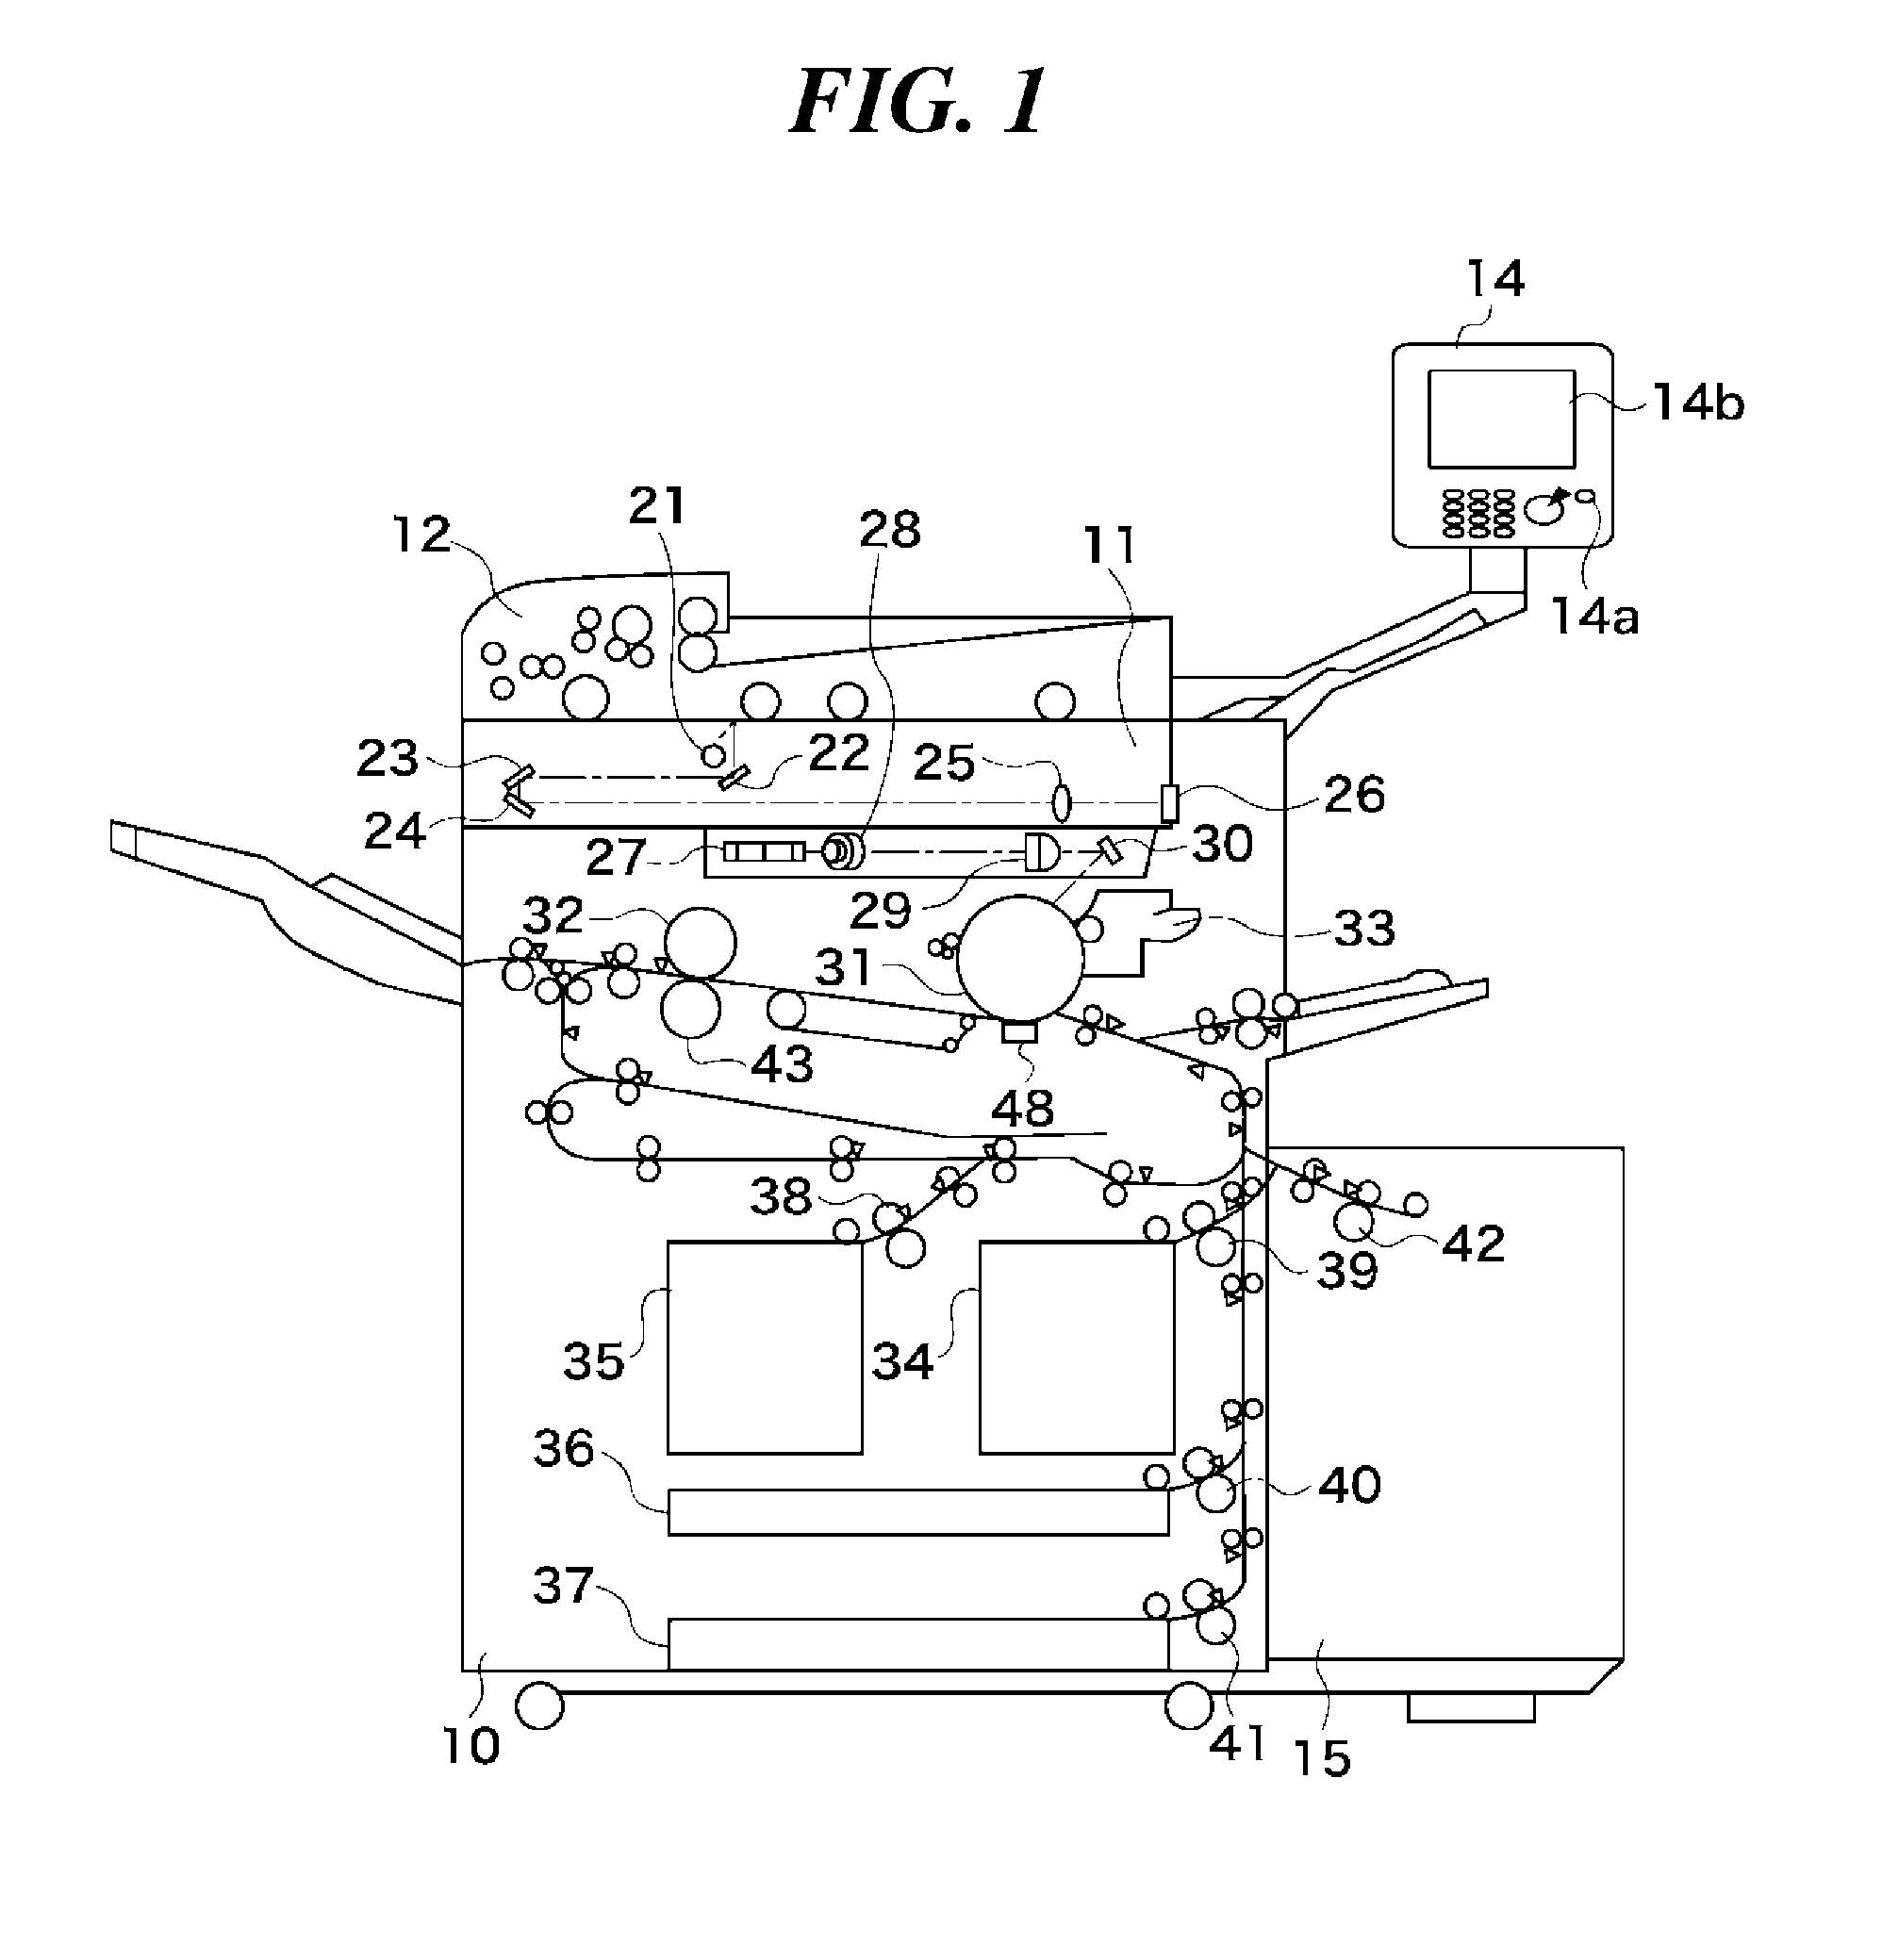 Image forming apparatus and power control method therefor